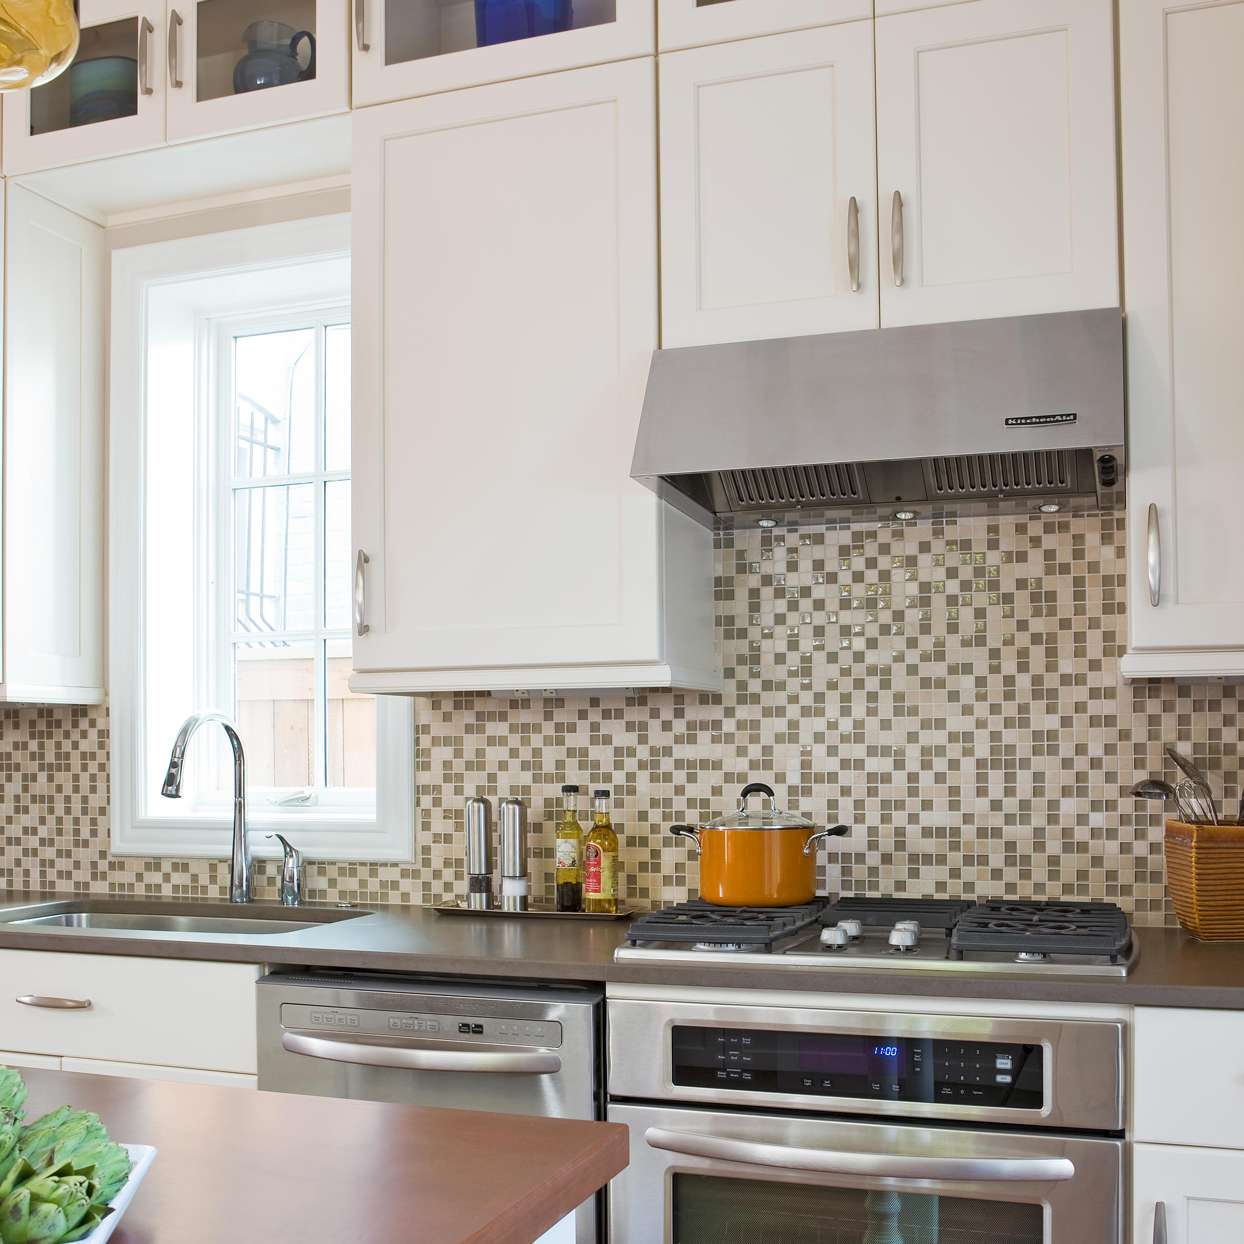 18 Budget Friendly Backsplash Ideas That Only Look Expensive ...